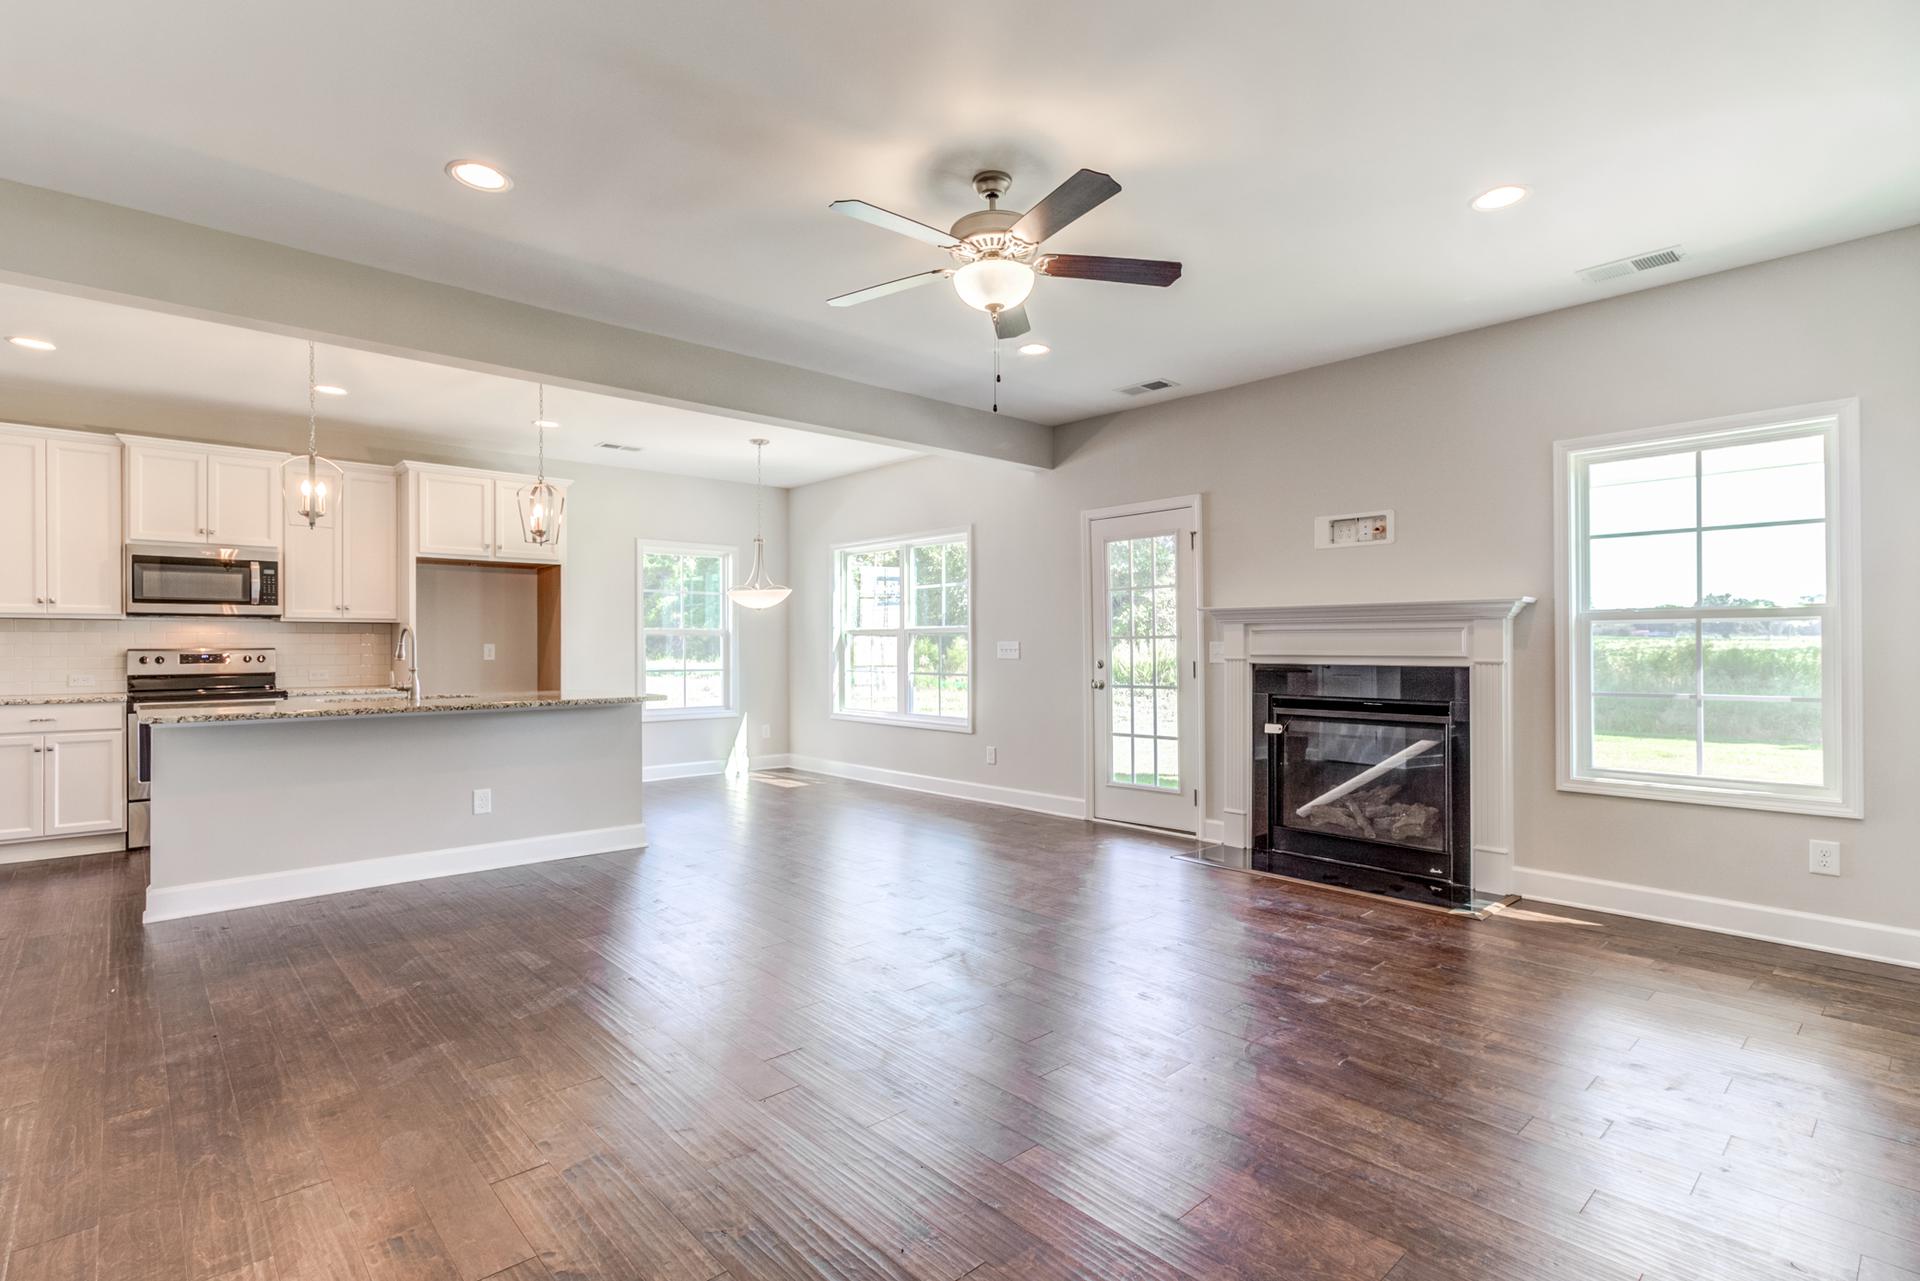 4br New Home in Cameron, NC